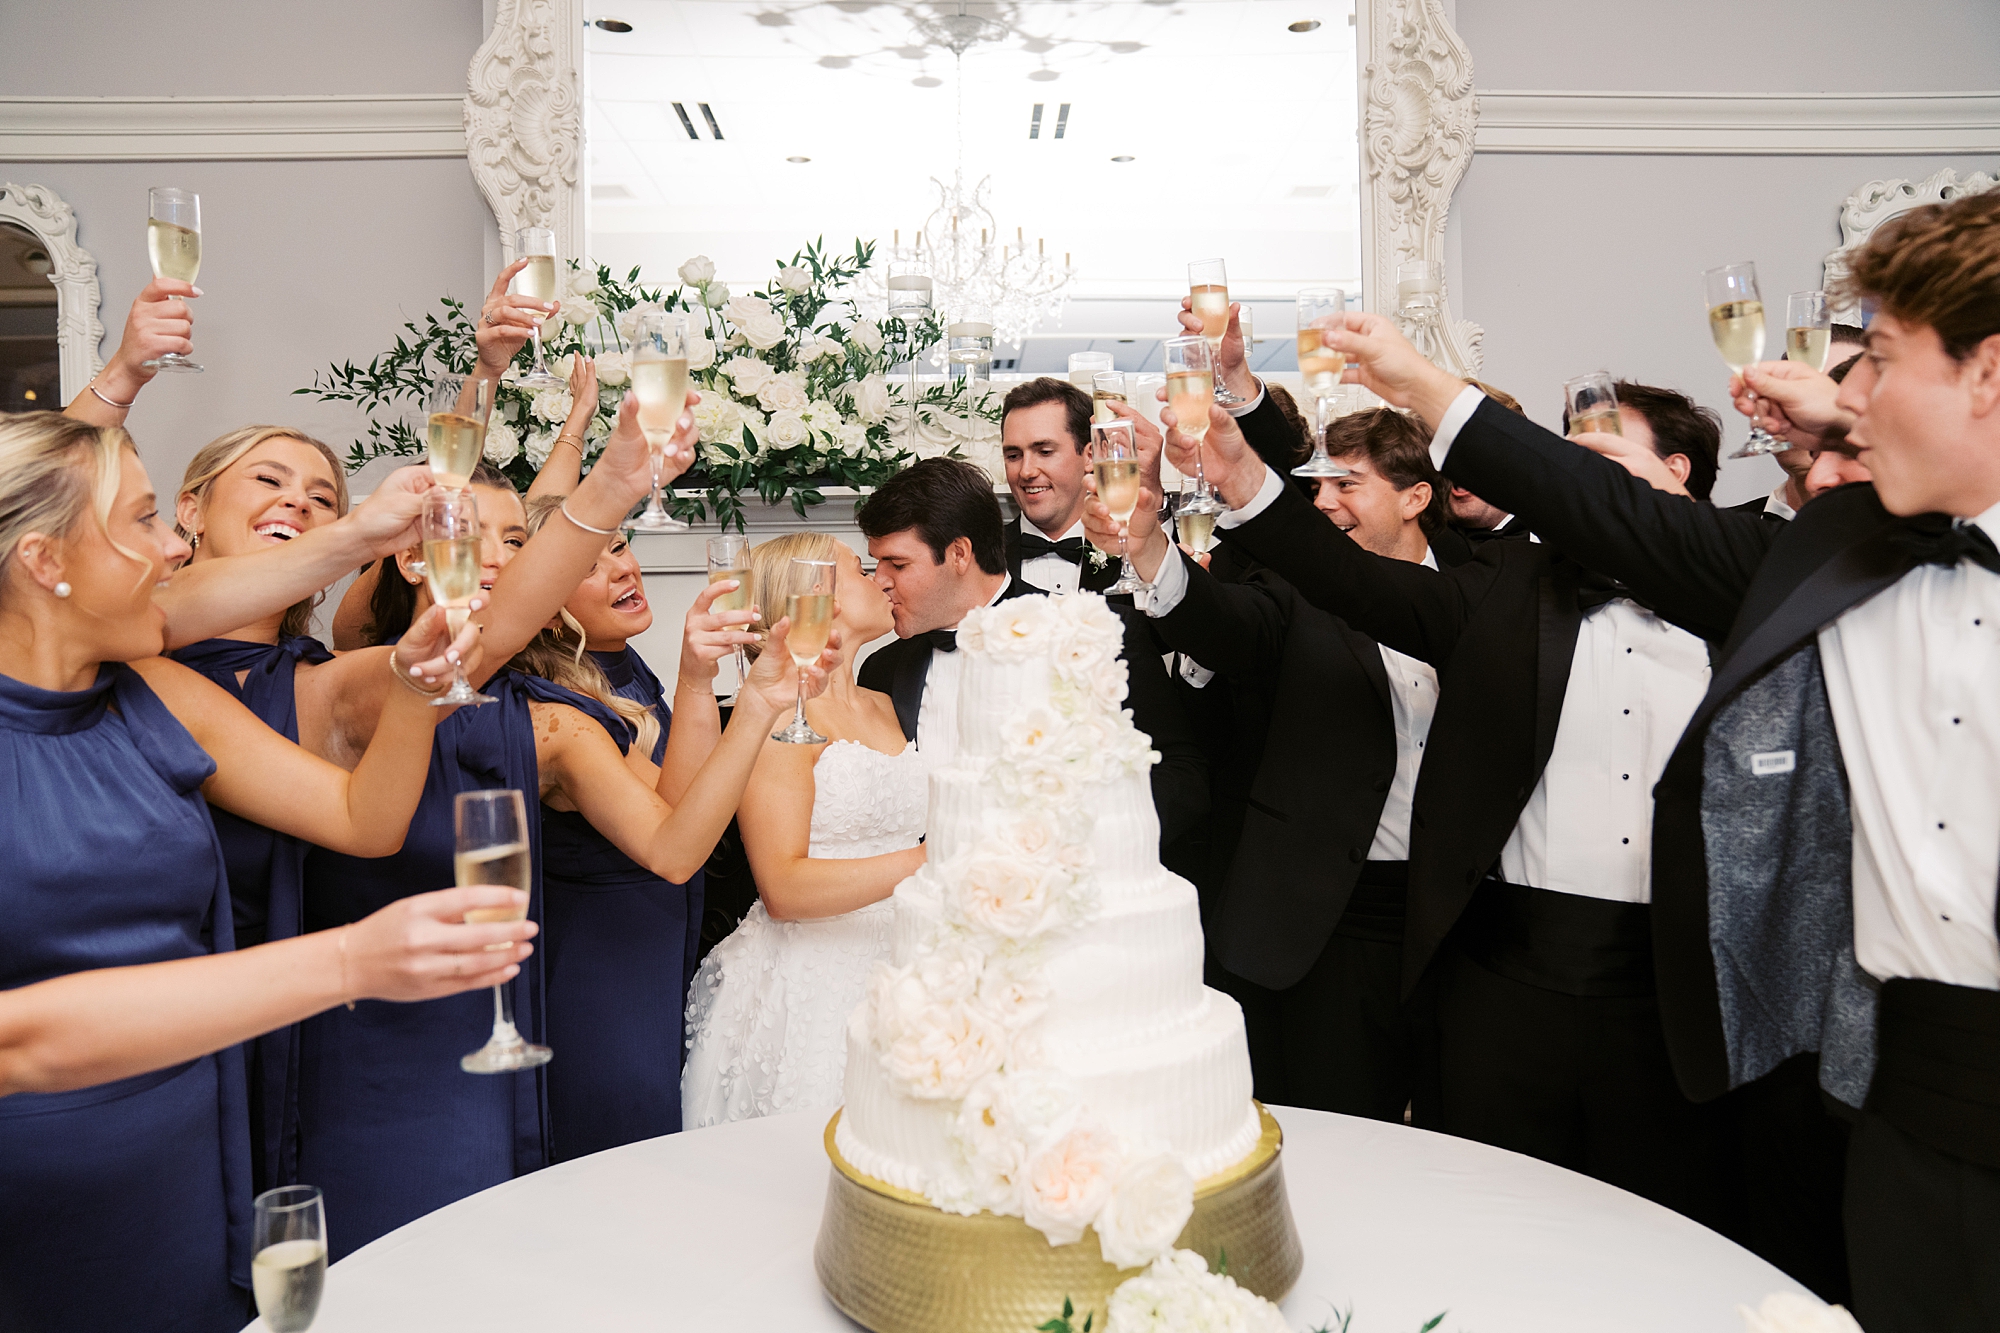 newlyweds kiss by tiered wedding cake with wedding party cheering around them